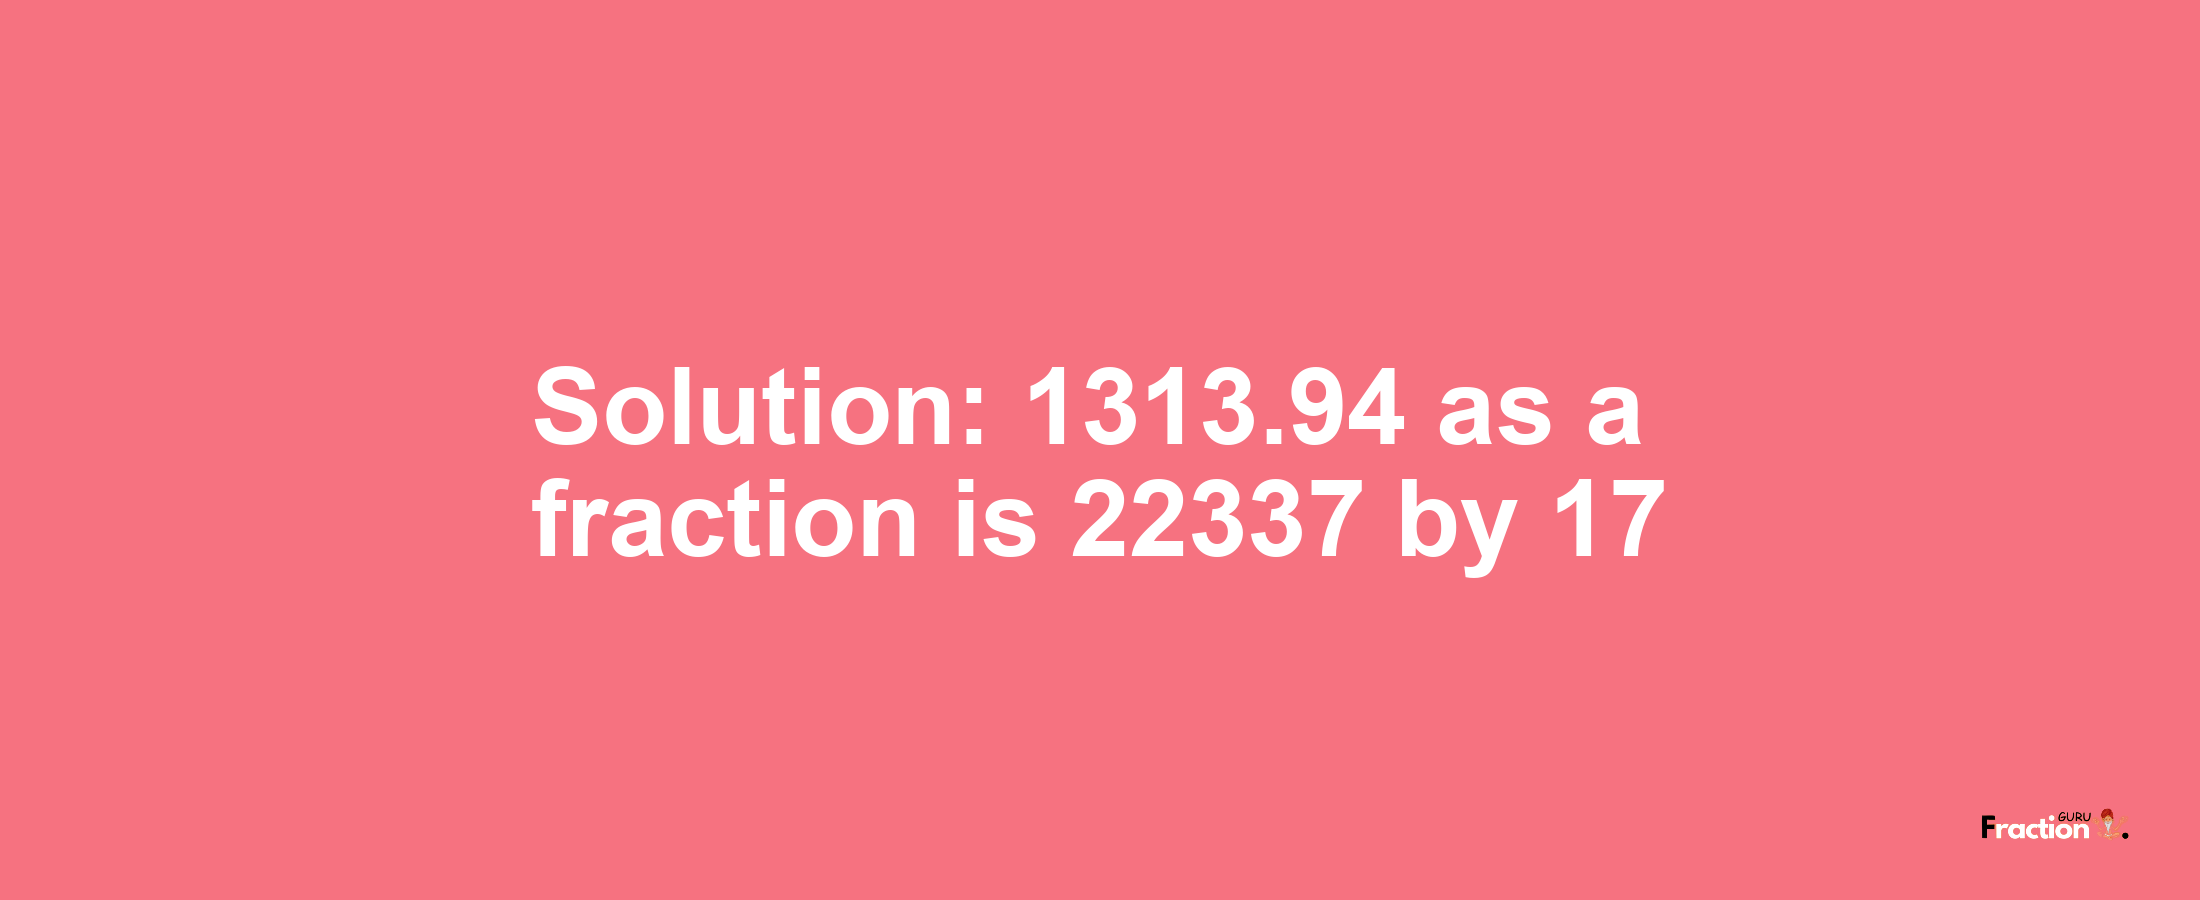 Solution:1313.94 as a fraction is 22337/17